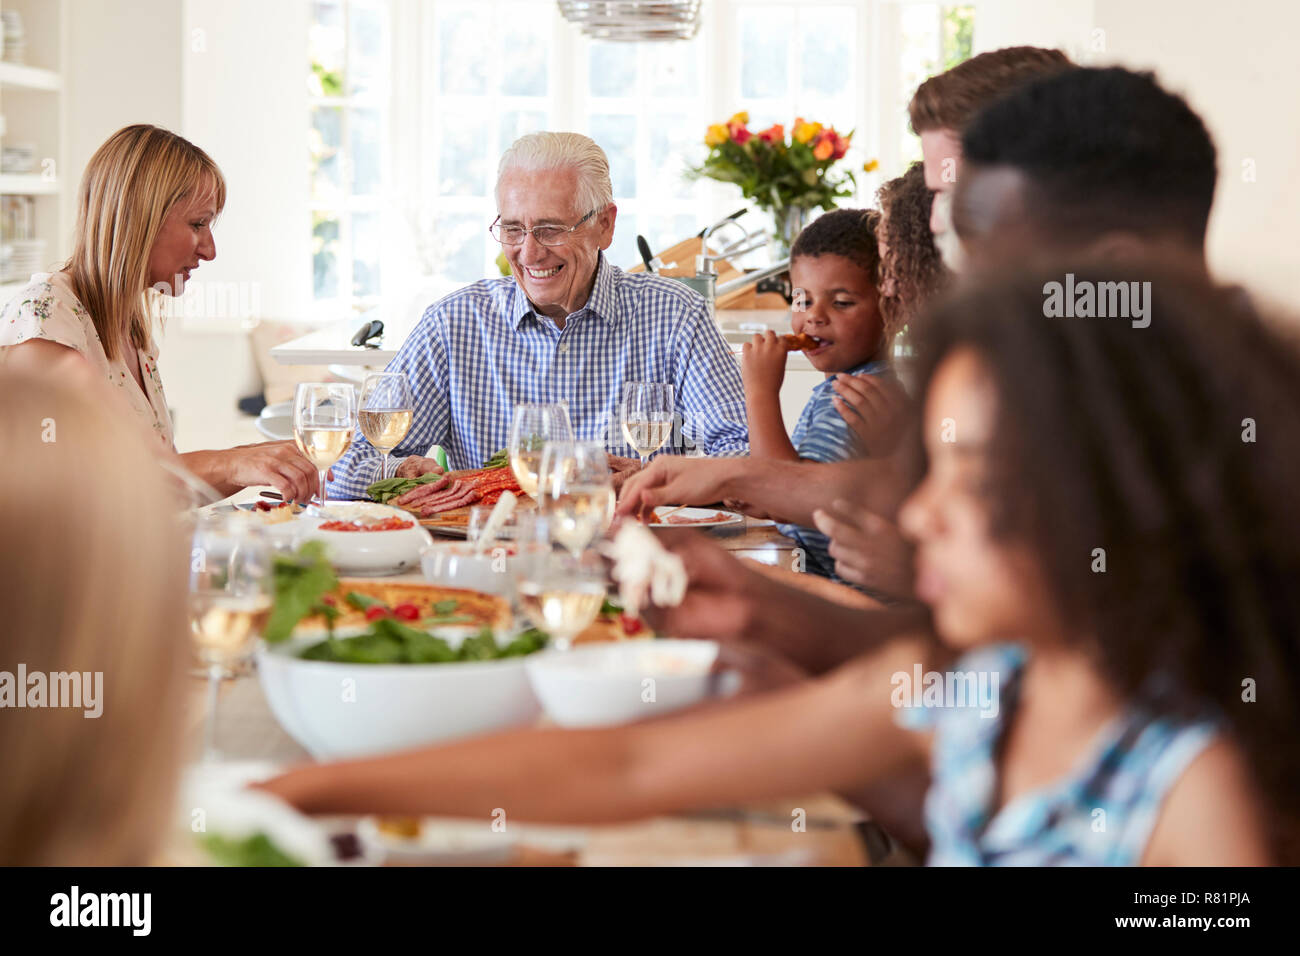 Group Of Multi-Generation Family And Friends Sitting Around Table And Enjoying Meal Stock Photo